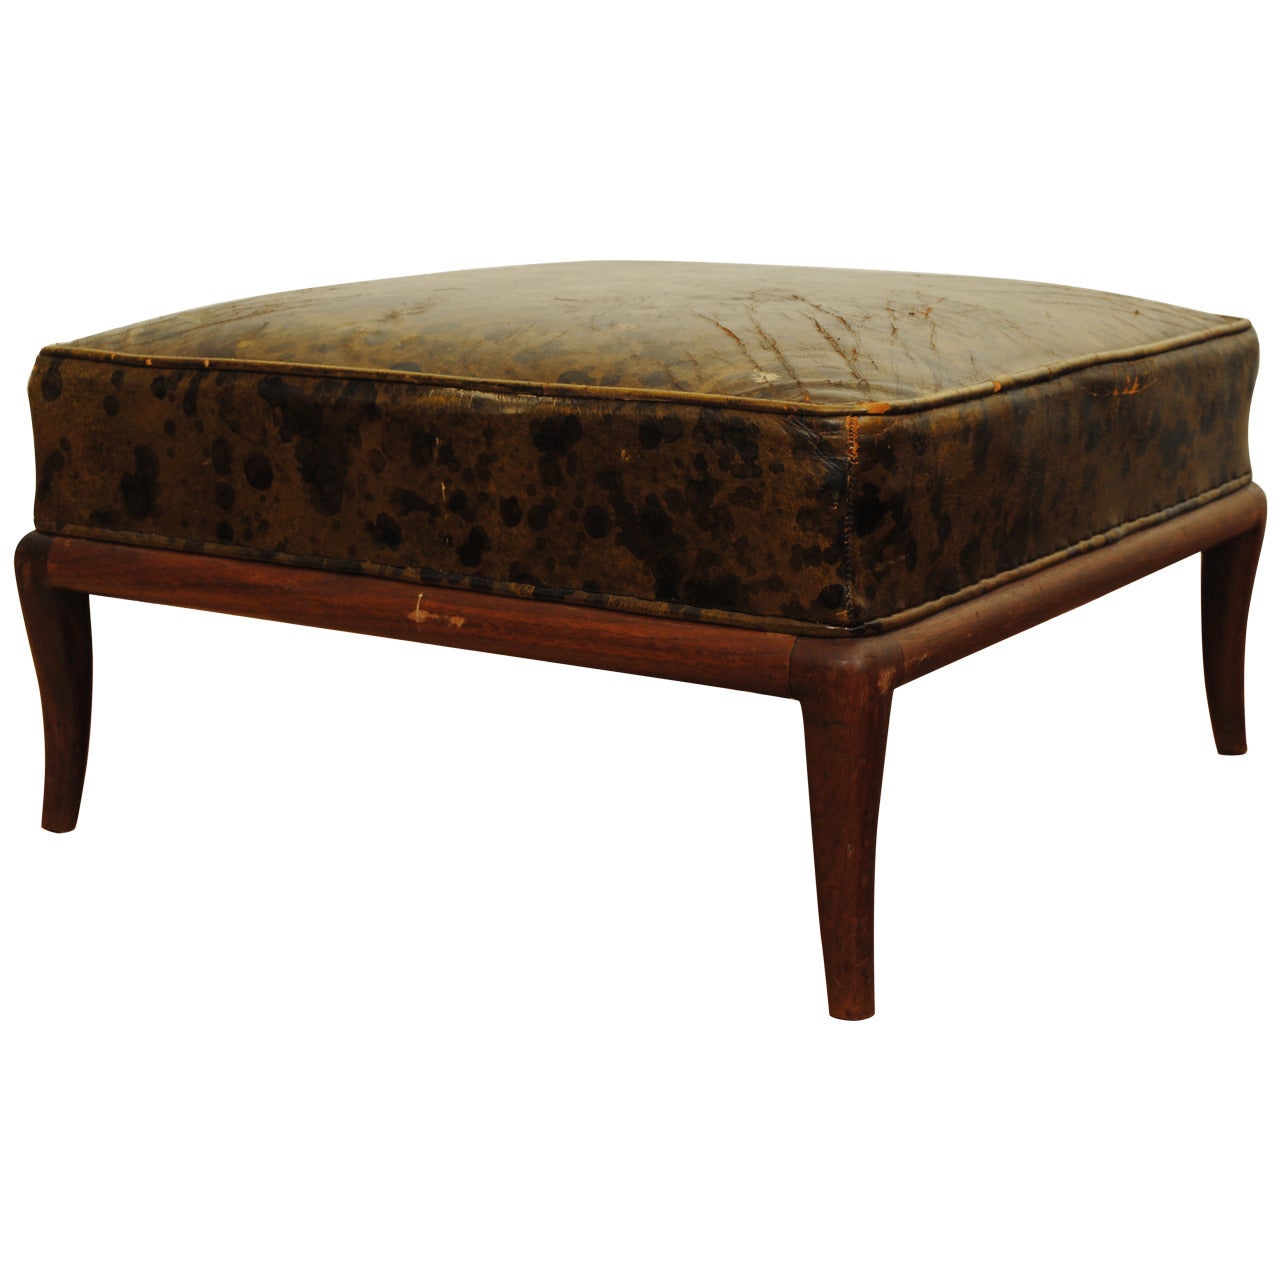 Walnut and Leather Upholstered Ottoman